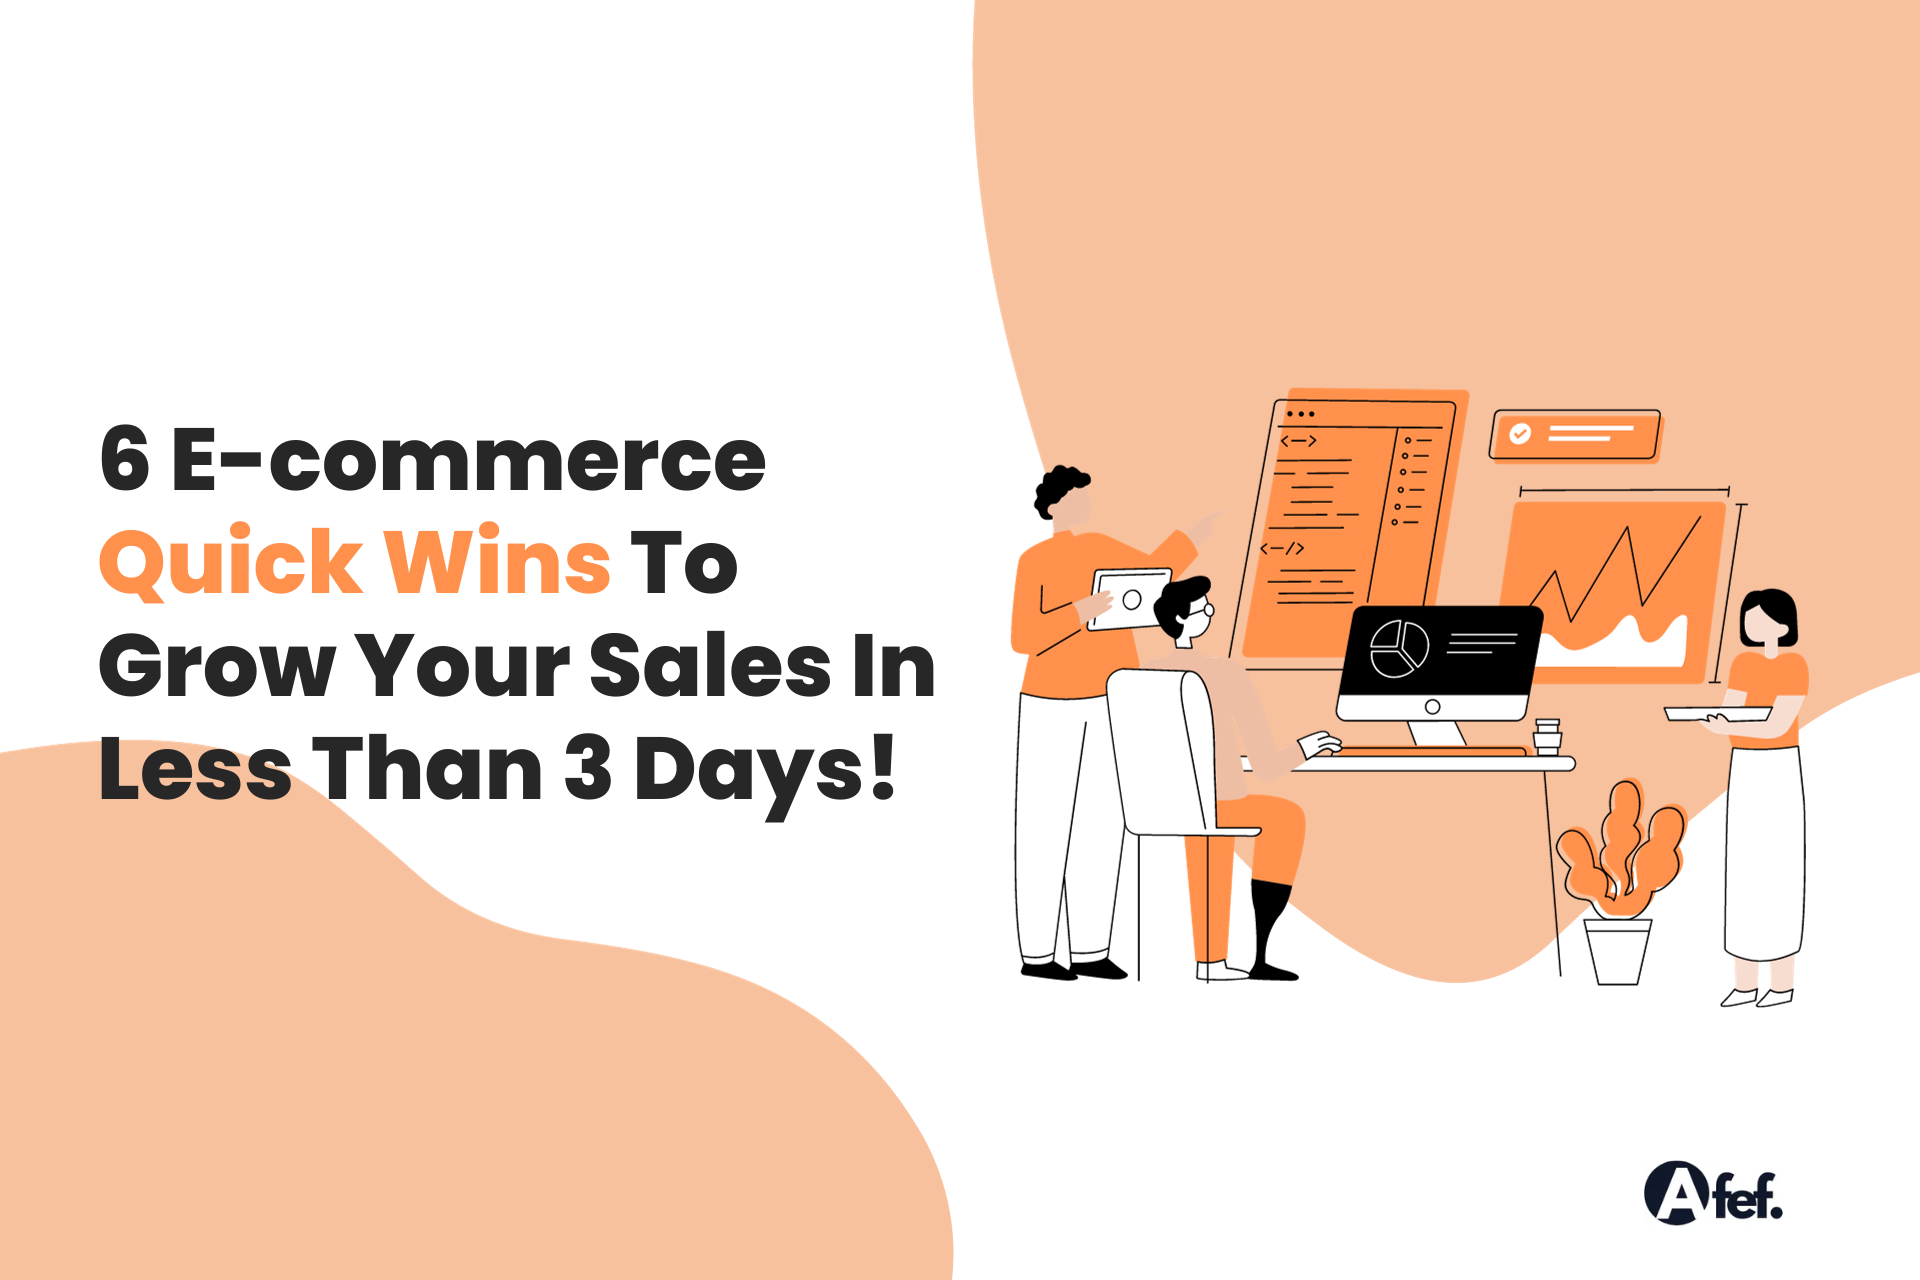 Try These 6 E-commerce Quick Wins To Grow Your Sales In Less Than 3 Days!